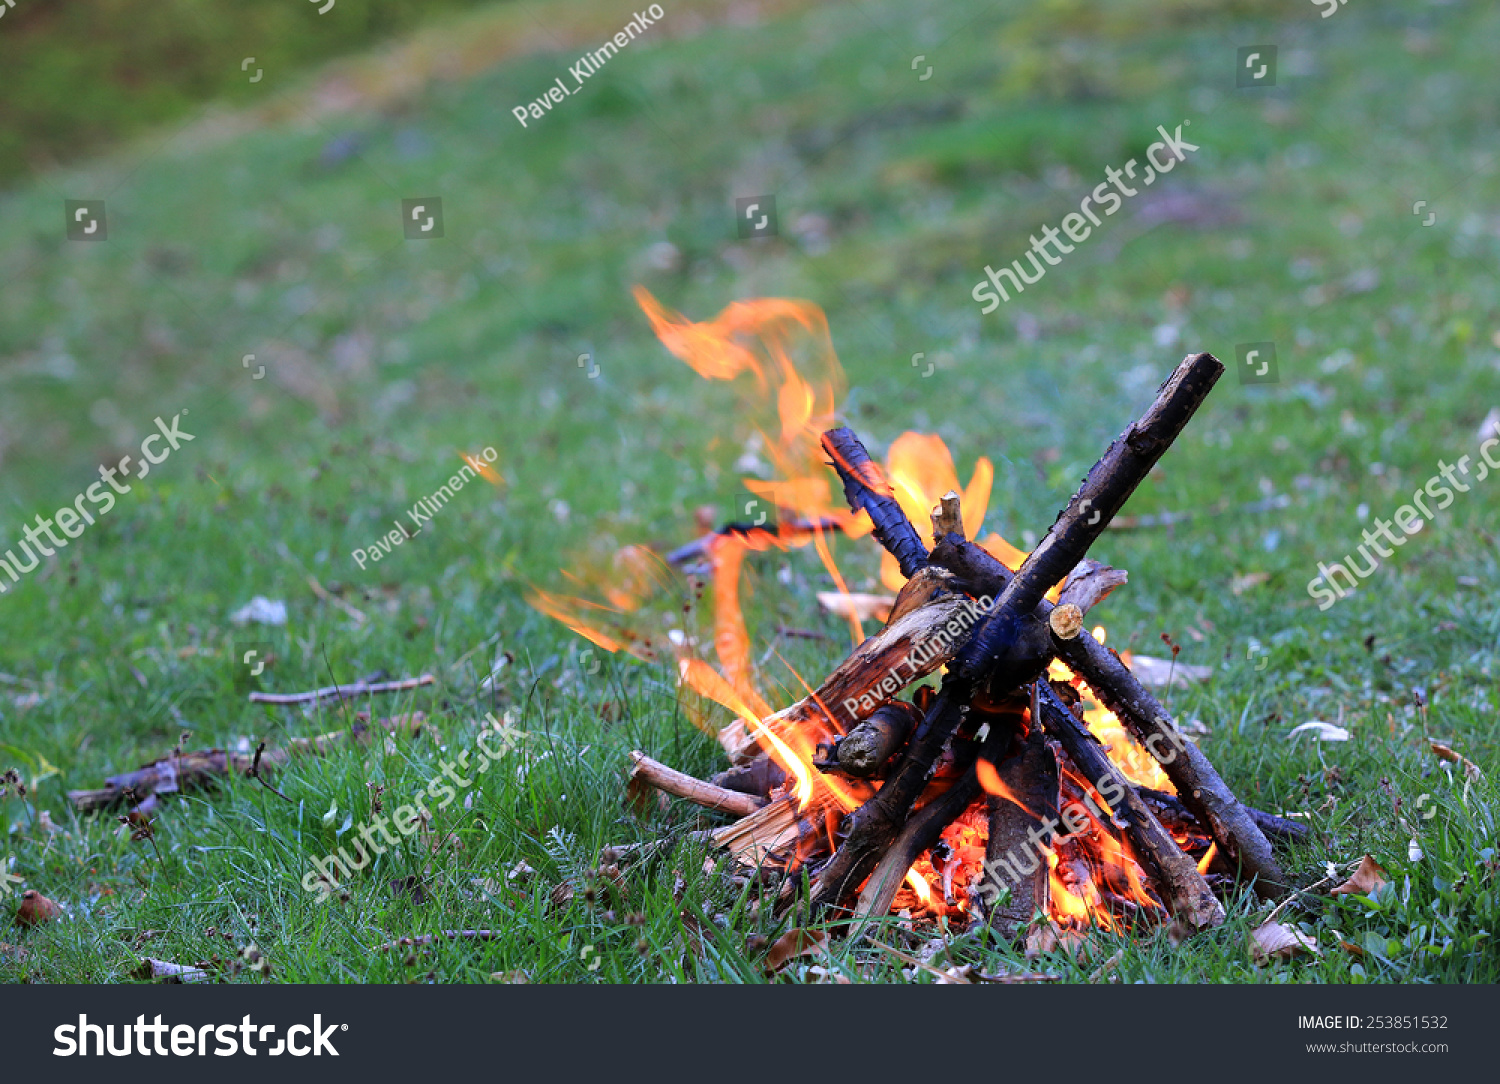 Small Campfire On Green Meadow Stock Photo 253851532 : Shutterstock